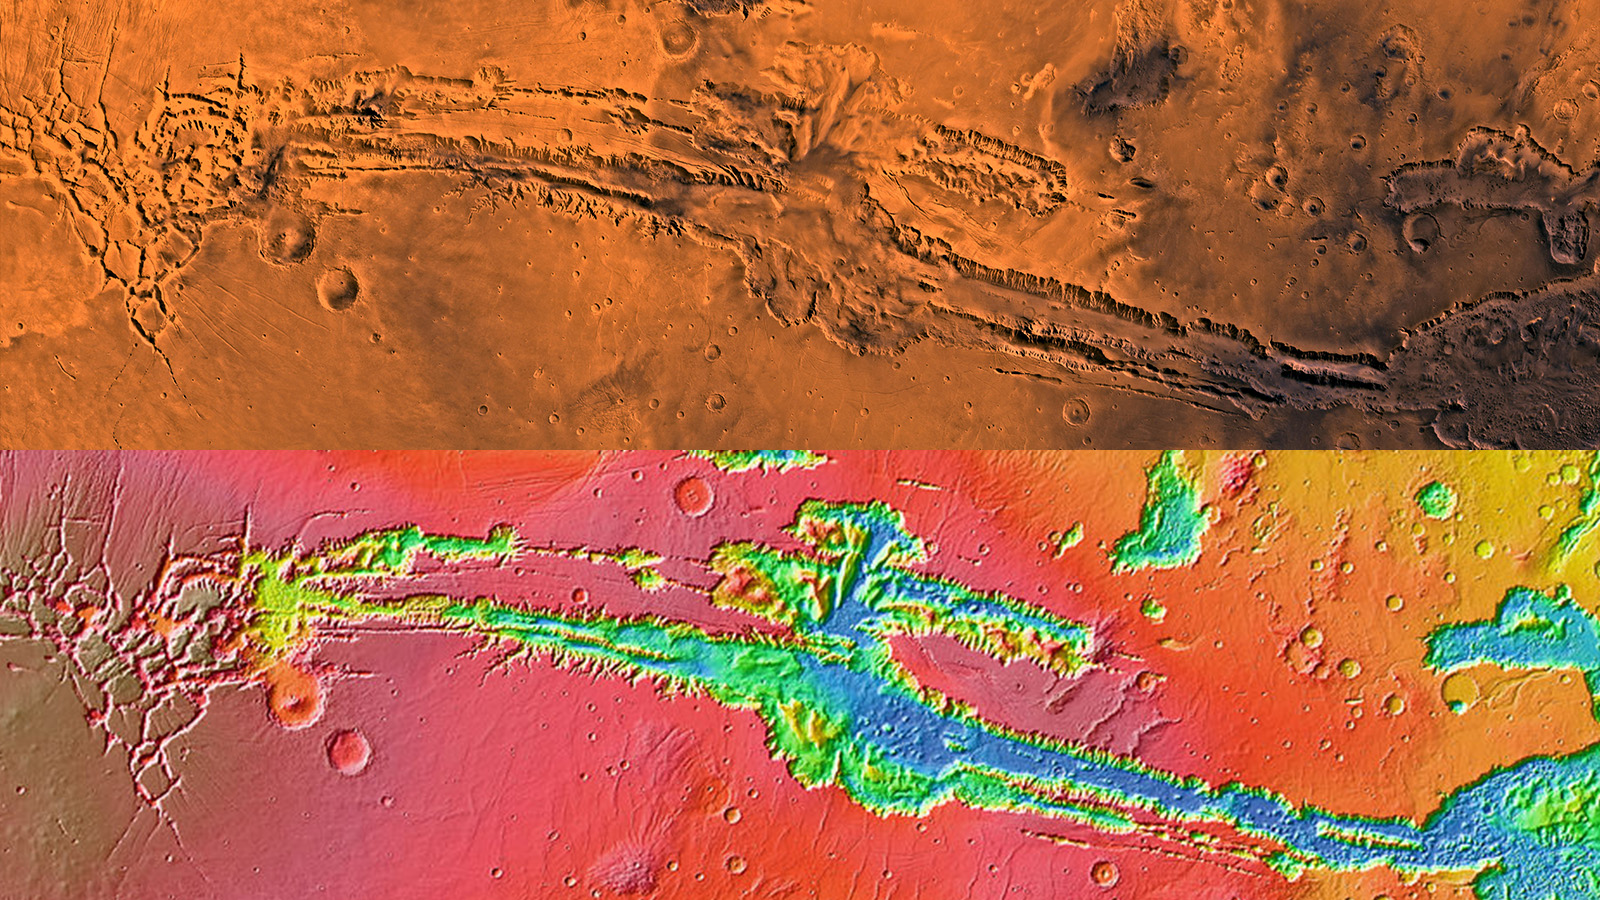 A long, deep, scar-like canyon runs across the length of both images. The center of the canyon is a deep blue, indicating a low relative altitude, while the area surrounding the canyon is red and white, indicating a higher relative altitude